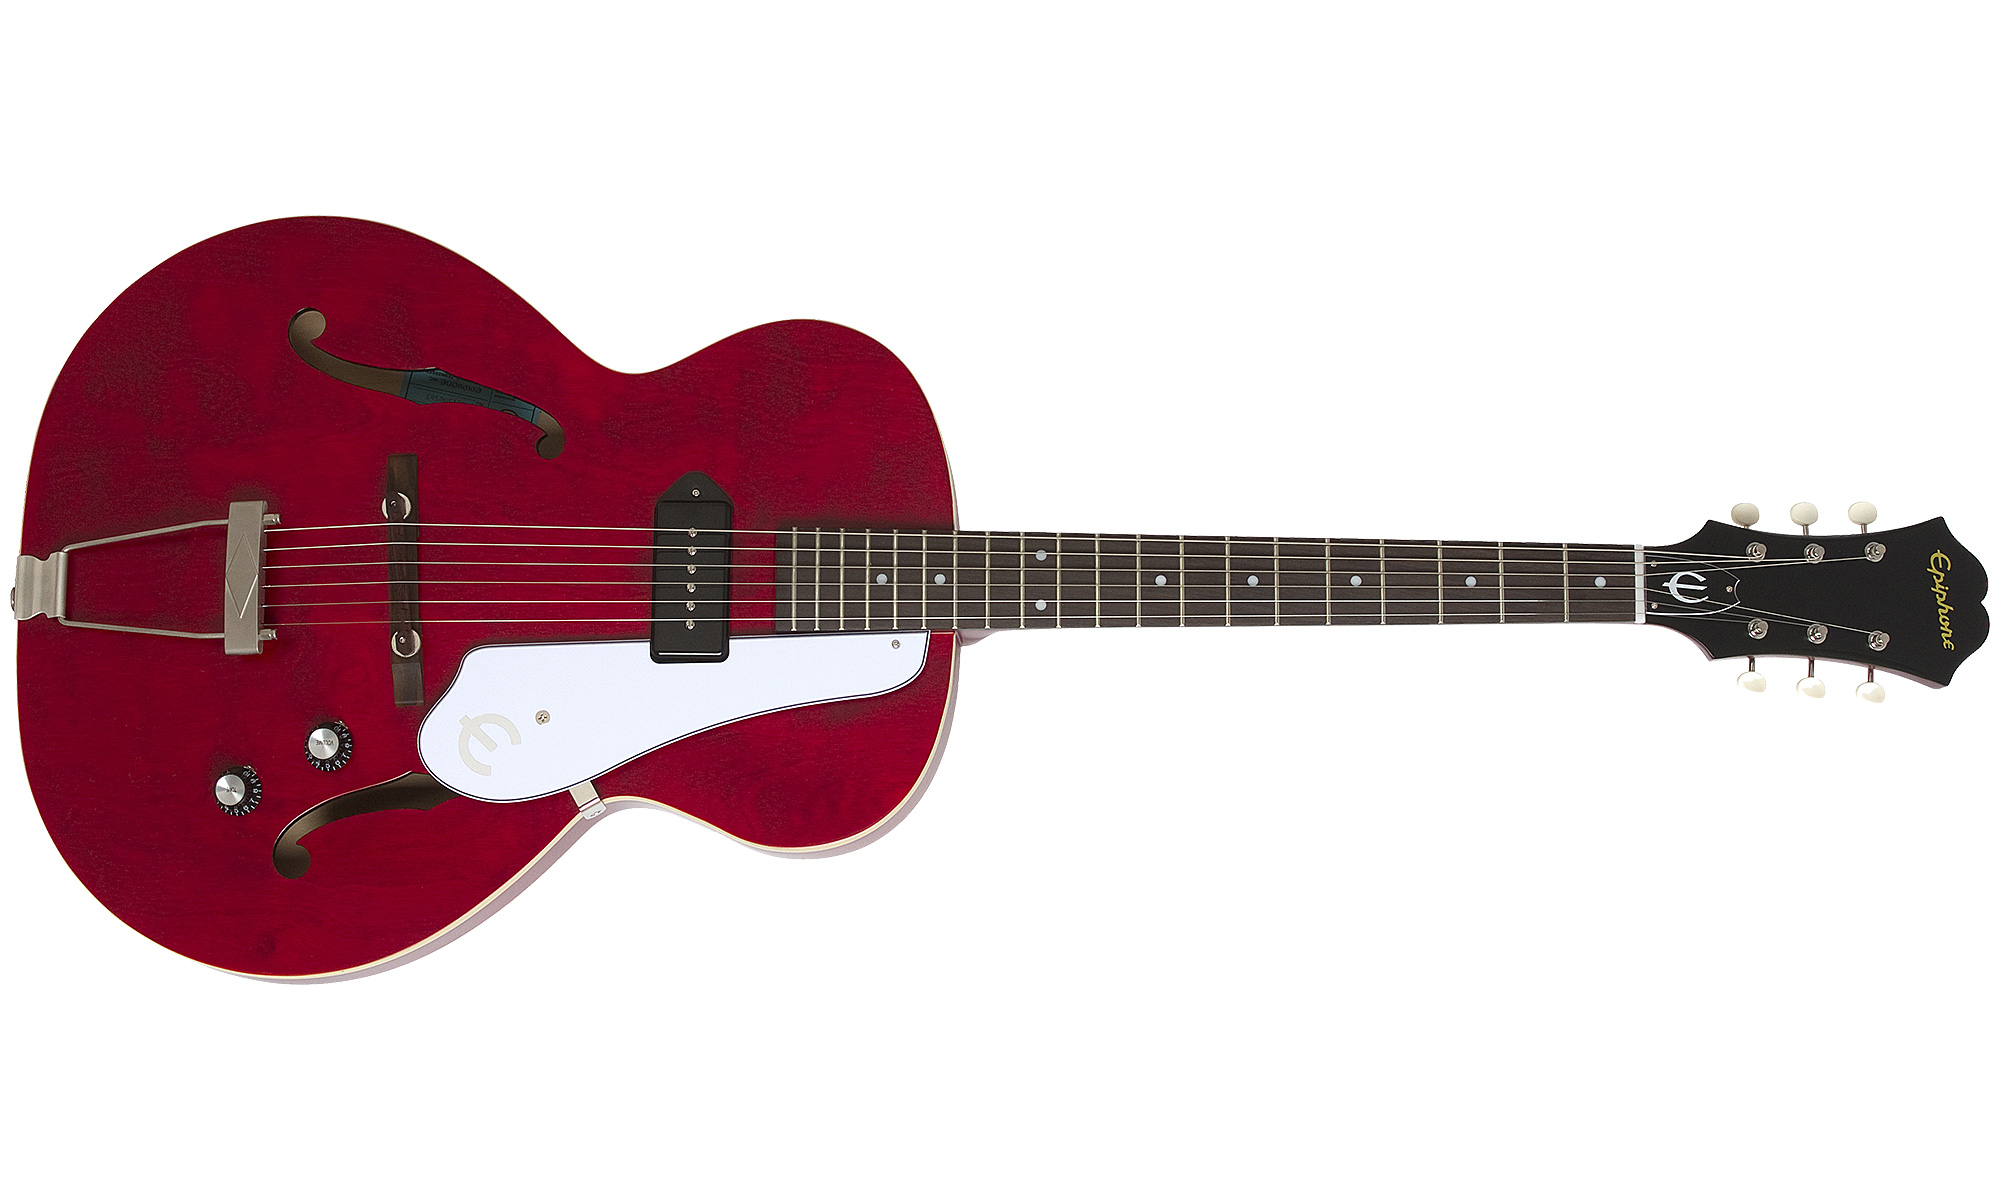 Epiphone Inspired By 1966 Century 2016 - Aged Gloss Cherry - Semi-hollow electric guitar - Variation 1